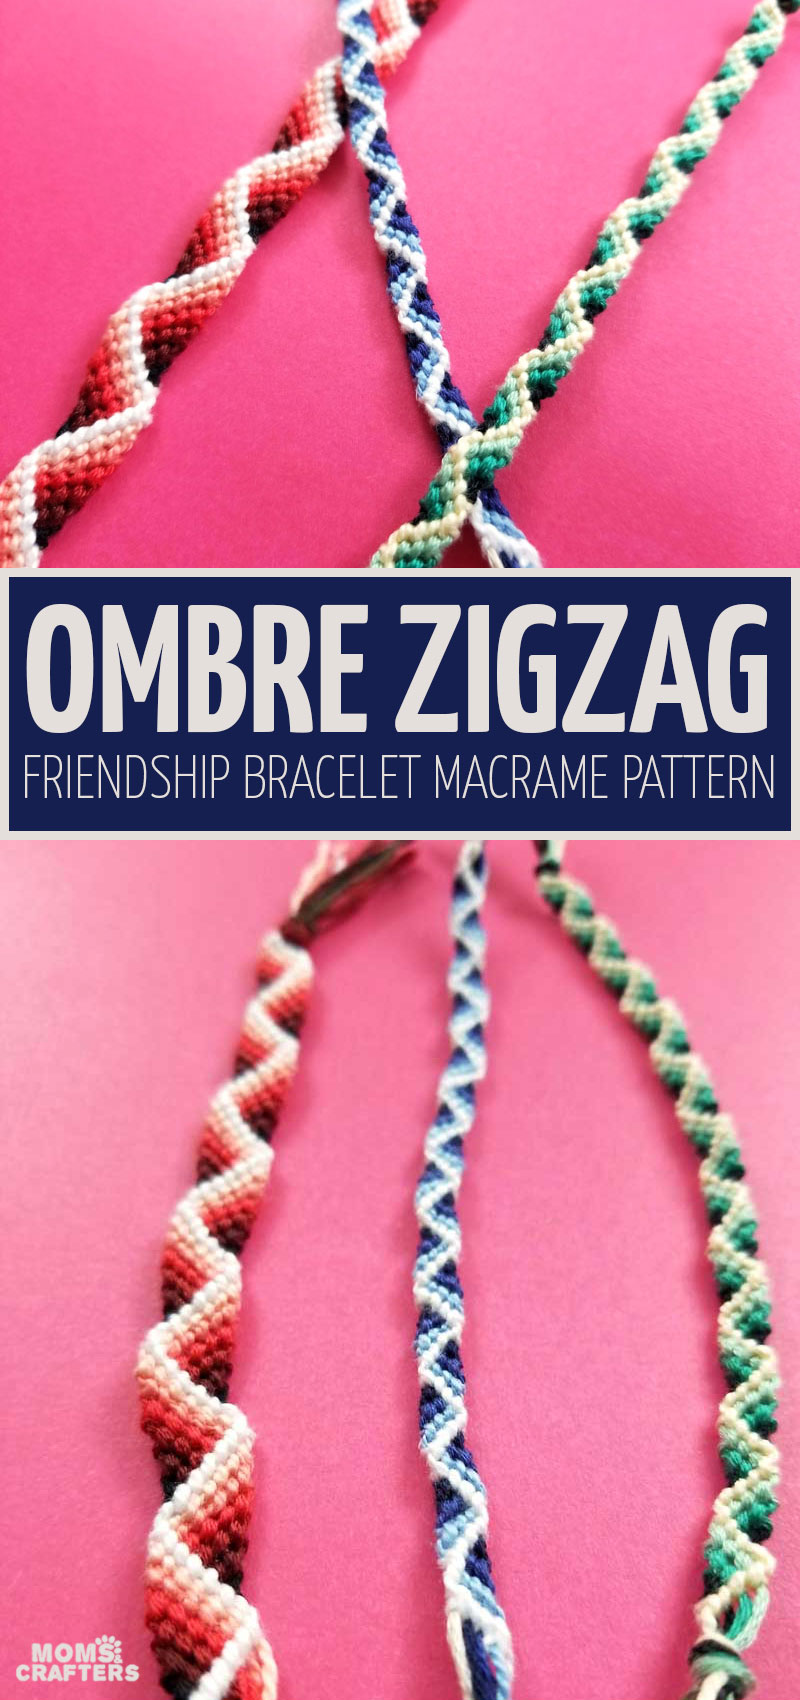 Designer New Unique Colorful and Multi-colored Friendship Bracelets  Handmade of Embroidery Bright Floss and Thread with Knots Stock Image -  Image of hippie, lgbt: 171539029